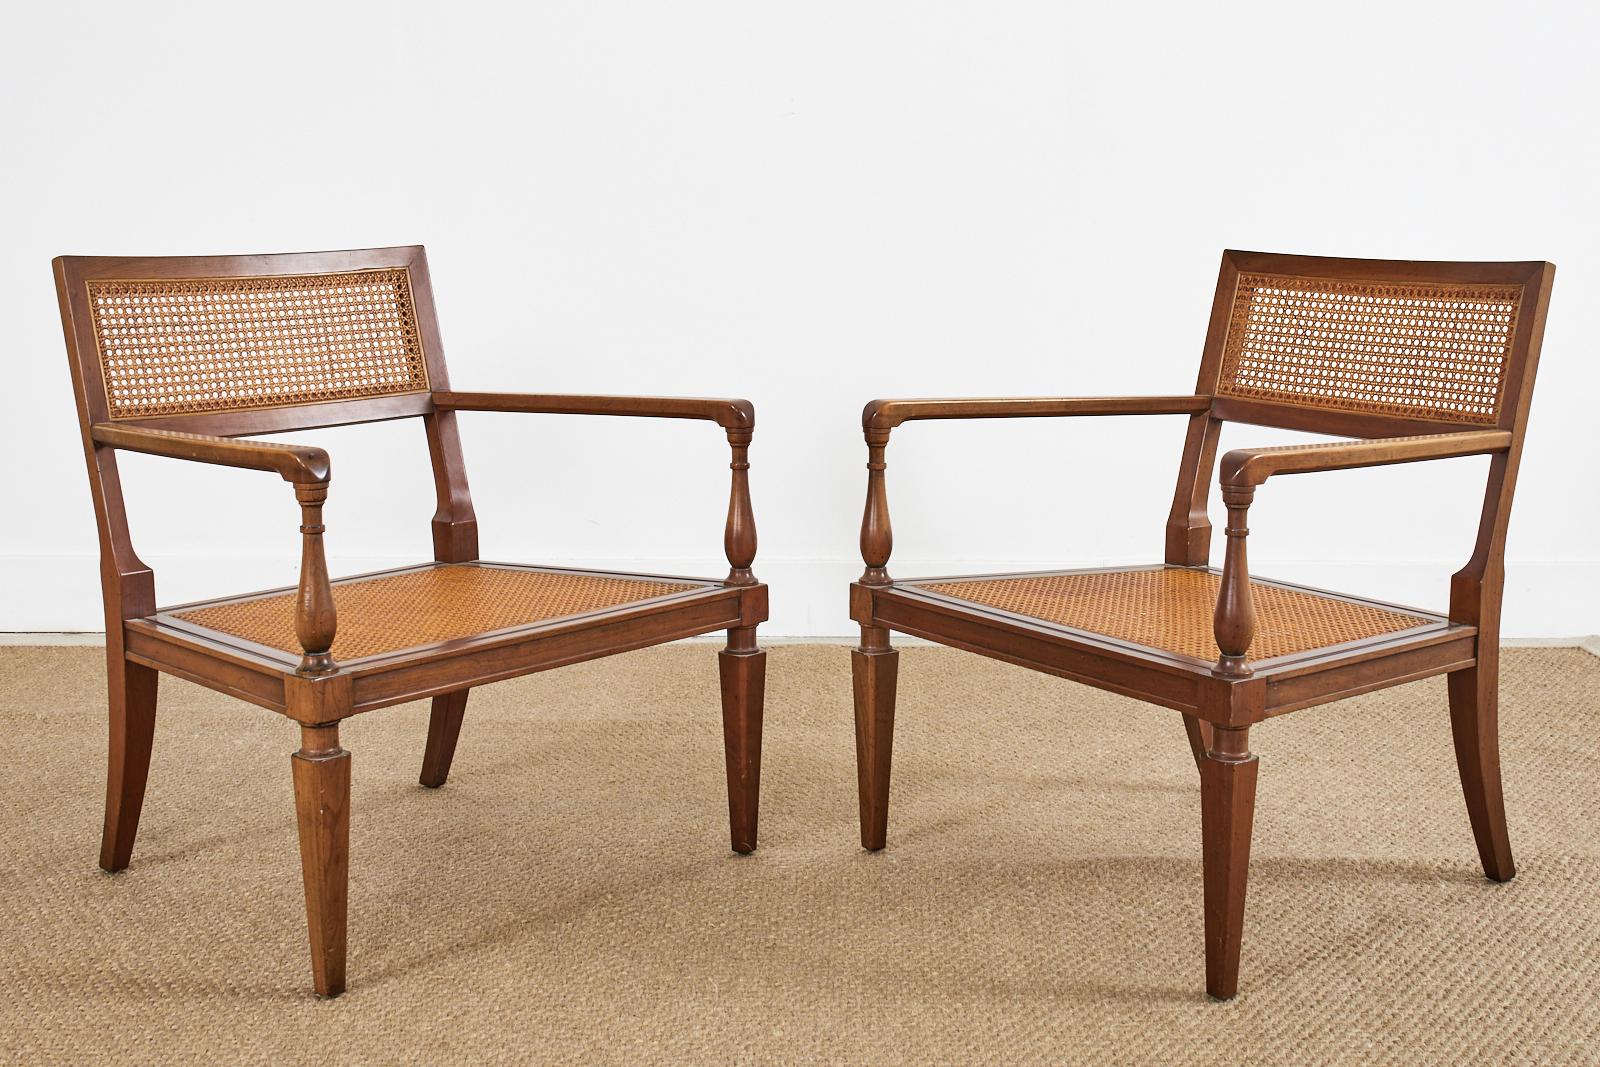 Pair of Neoclassical Style Walnut Cane Lounge Chairs by Baker 1